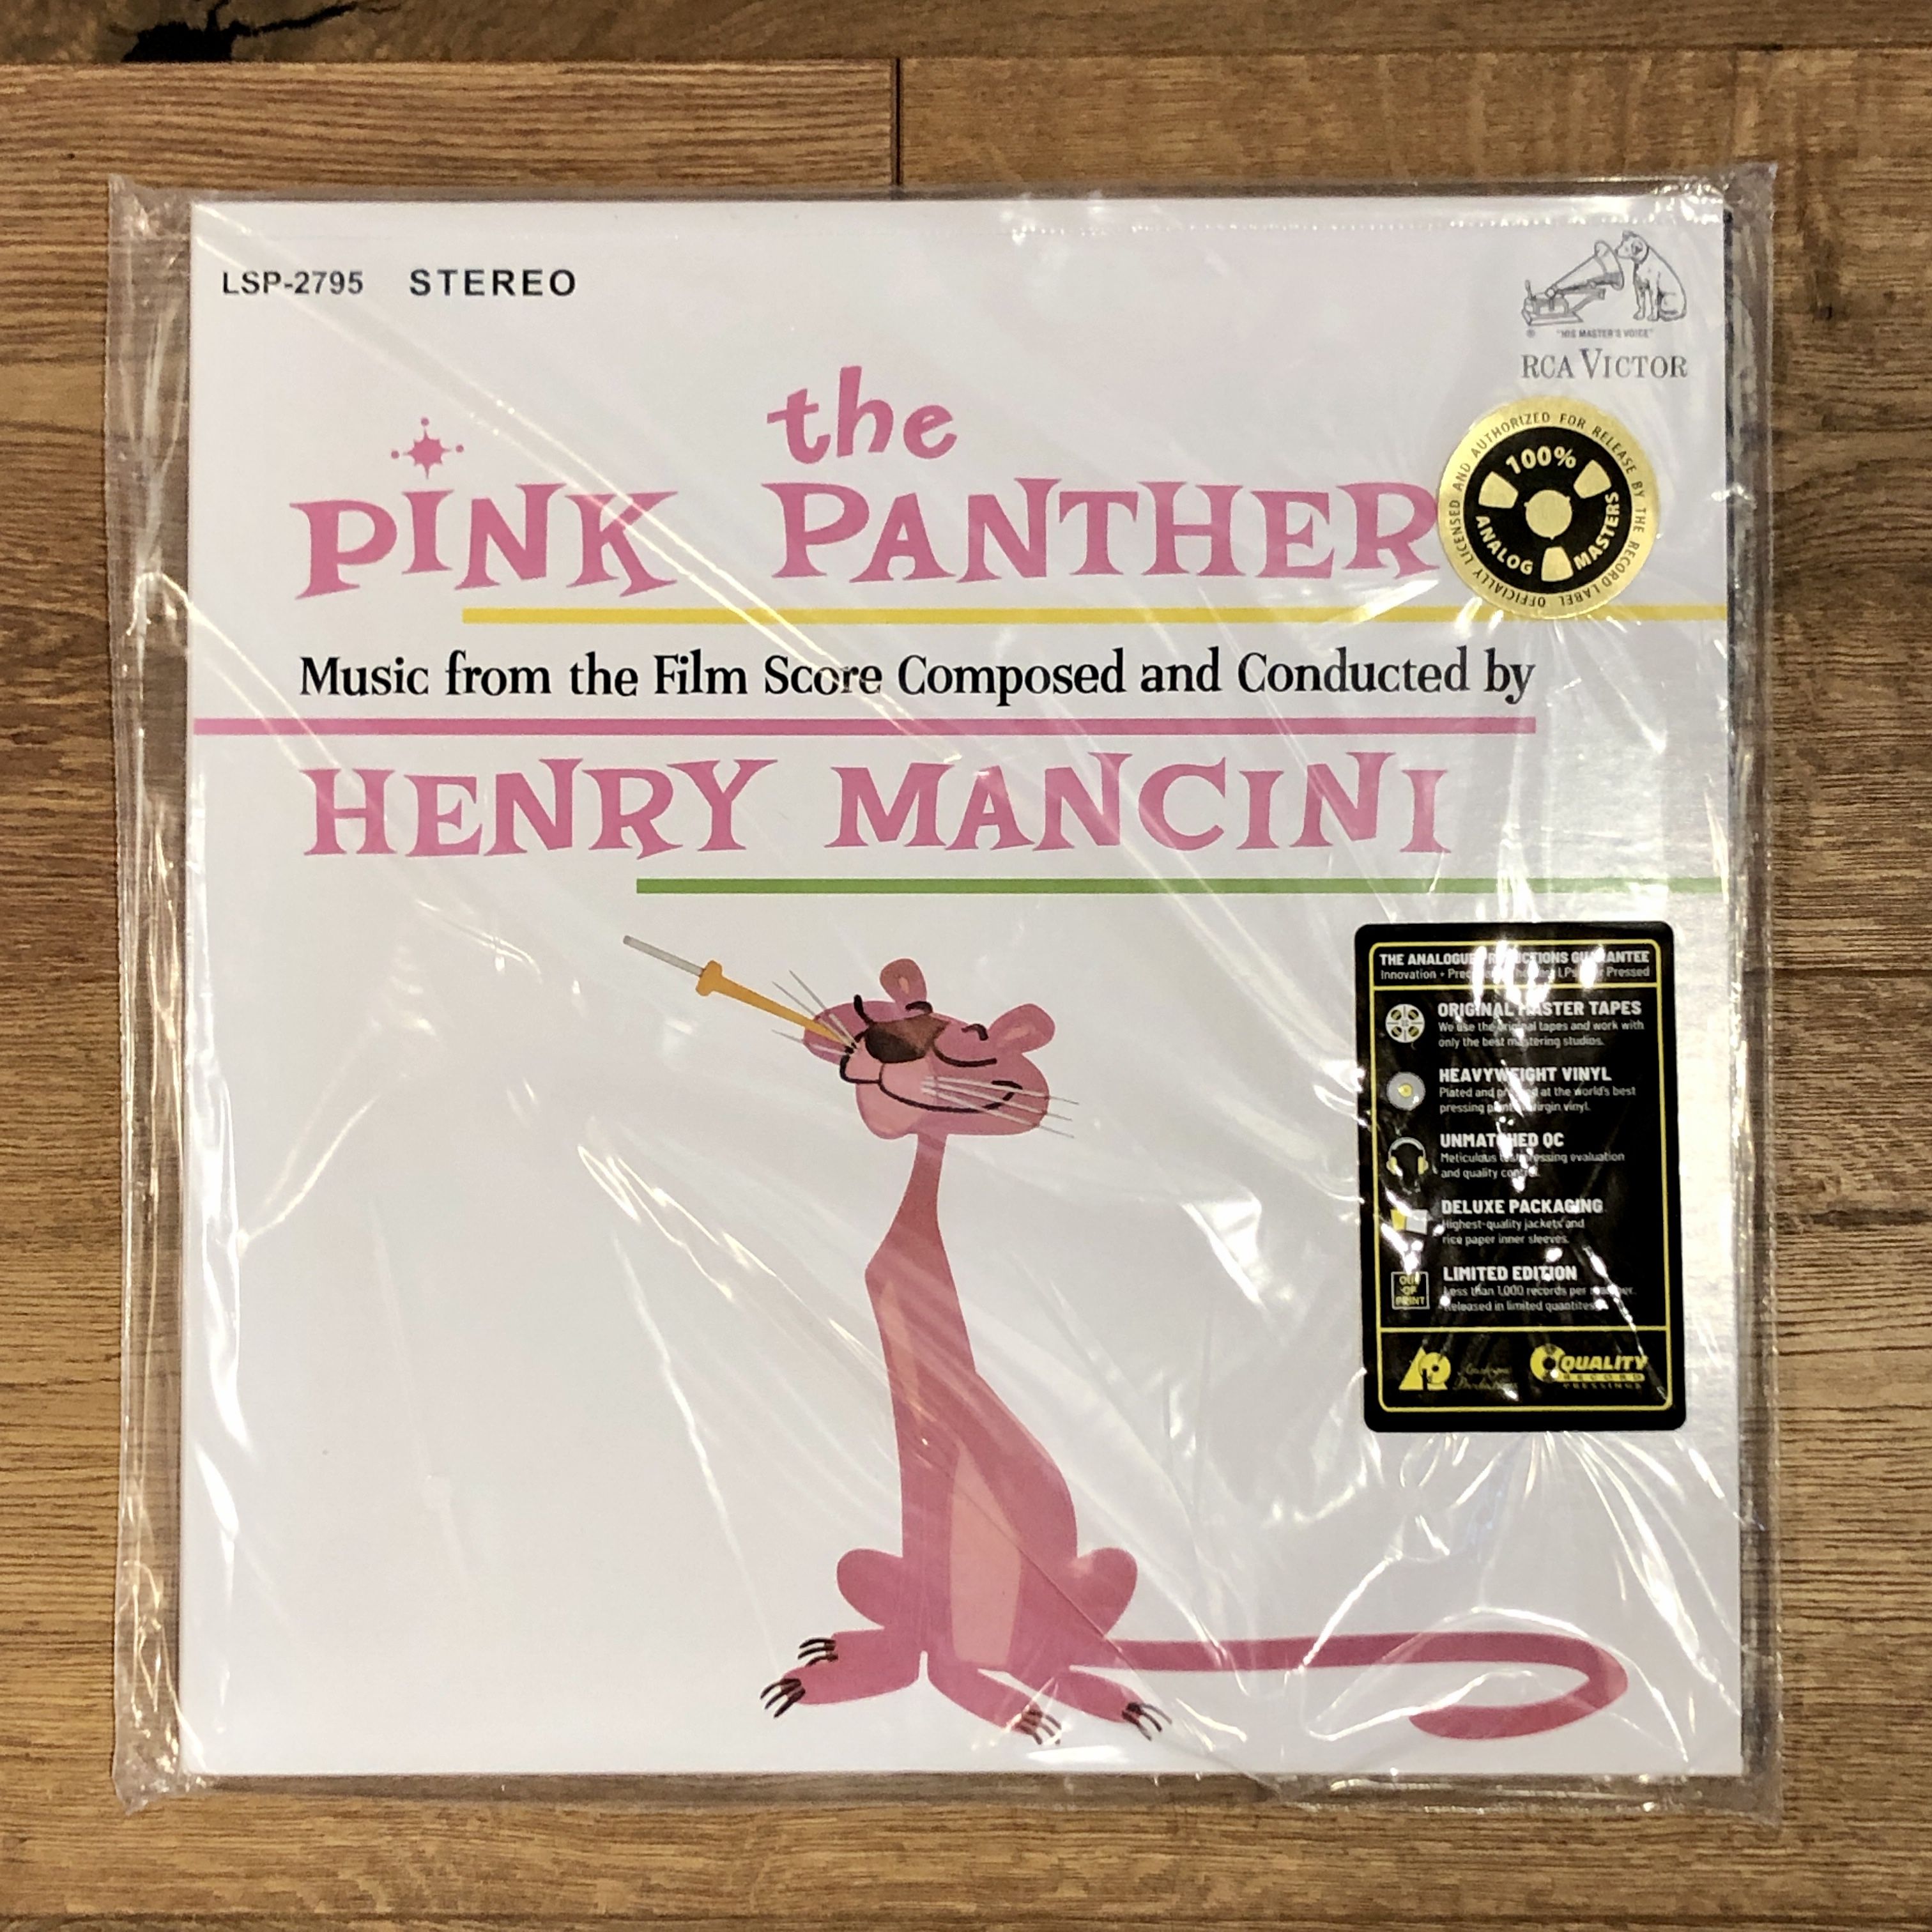 Henry mancini the pink panther. Pink Panther музыка. Henry Mancini шрифт. Henry Mancini -the Pink Panther (Original)1963 альбом.